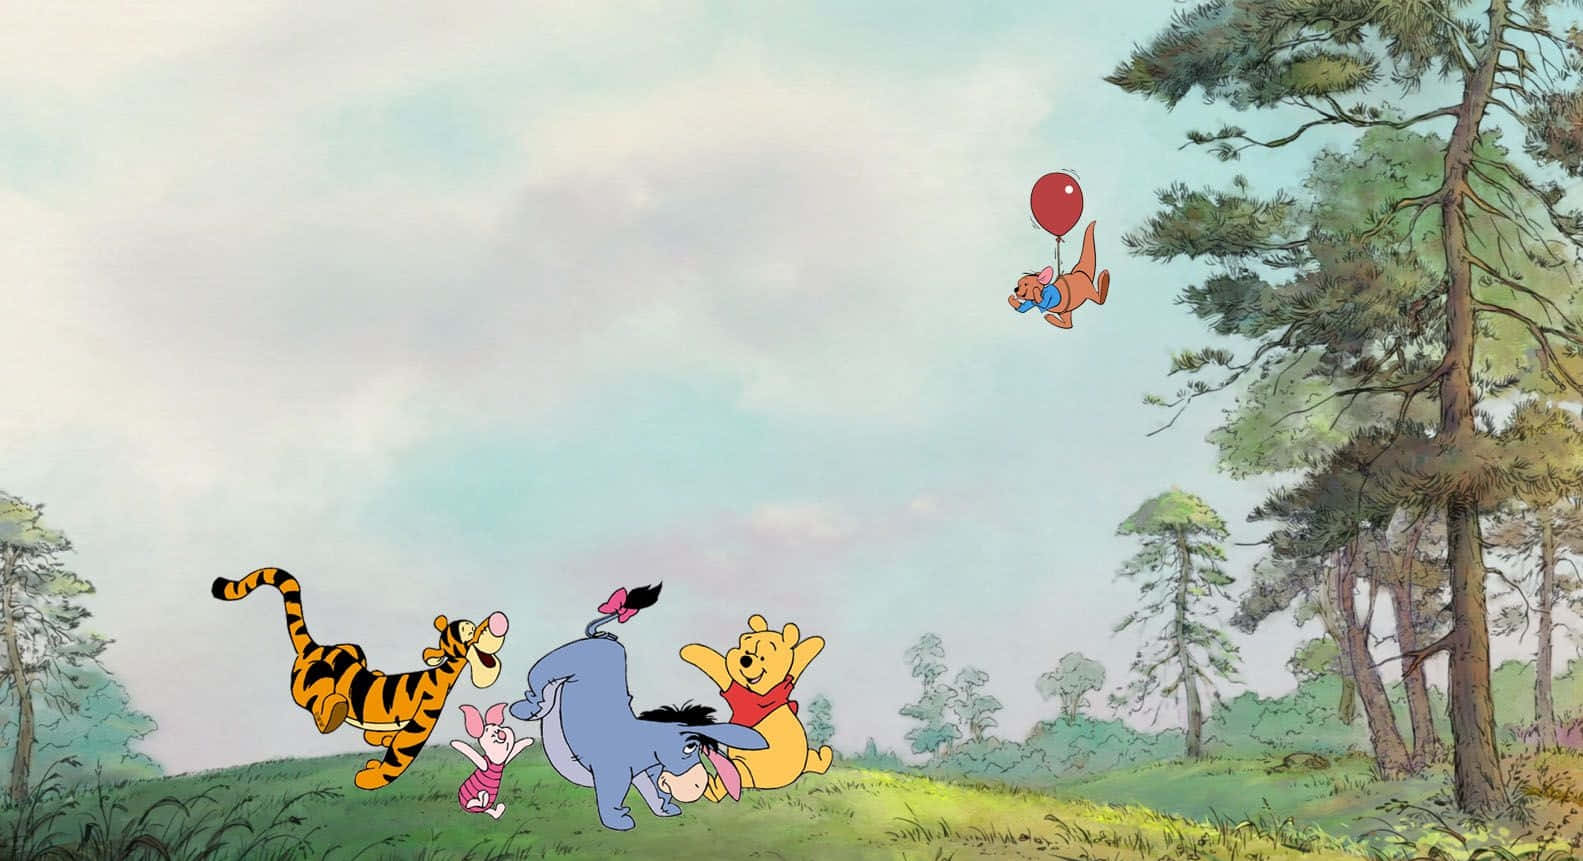 Christopher Robin and Winnie the Pooh enjoying a sunny day in the Hundred Acre Wood Wallpaper